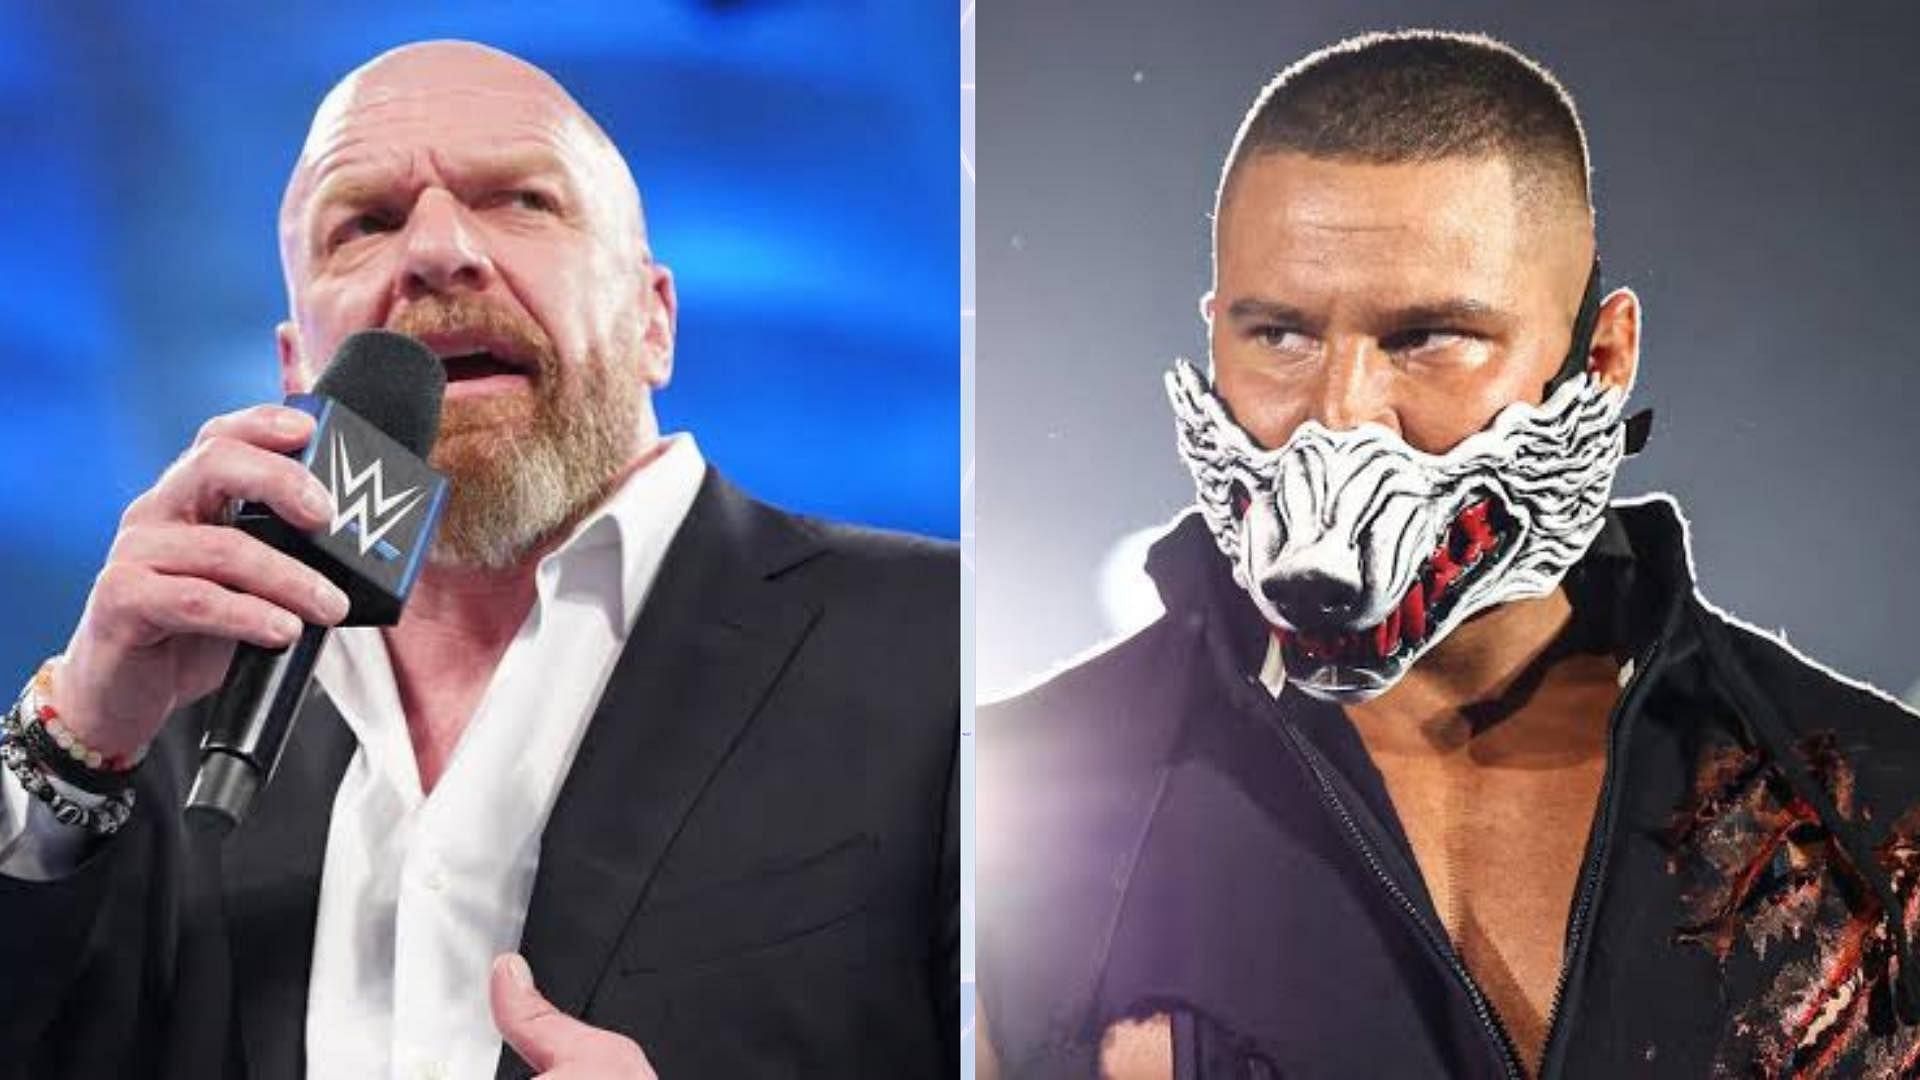 Triple H can give a major push to well-deserved stars following WWE Draft (Source:WWE)